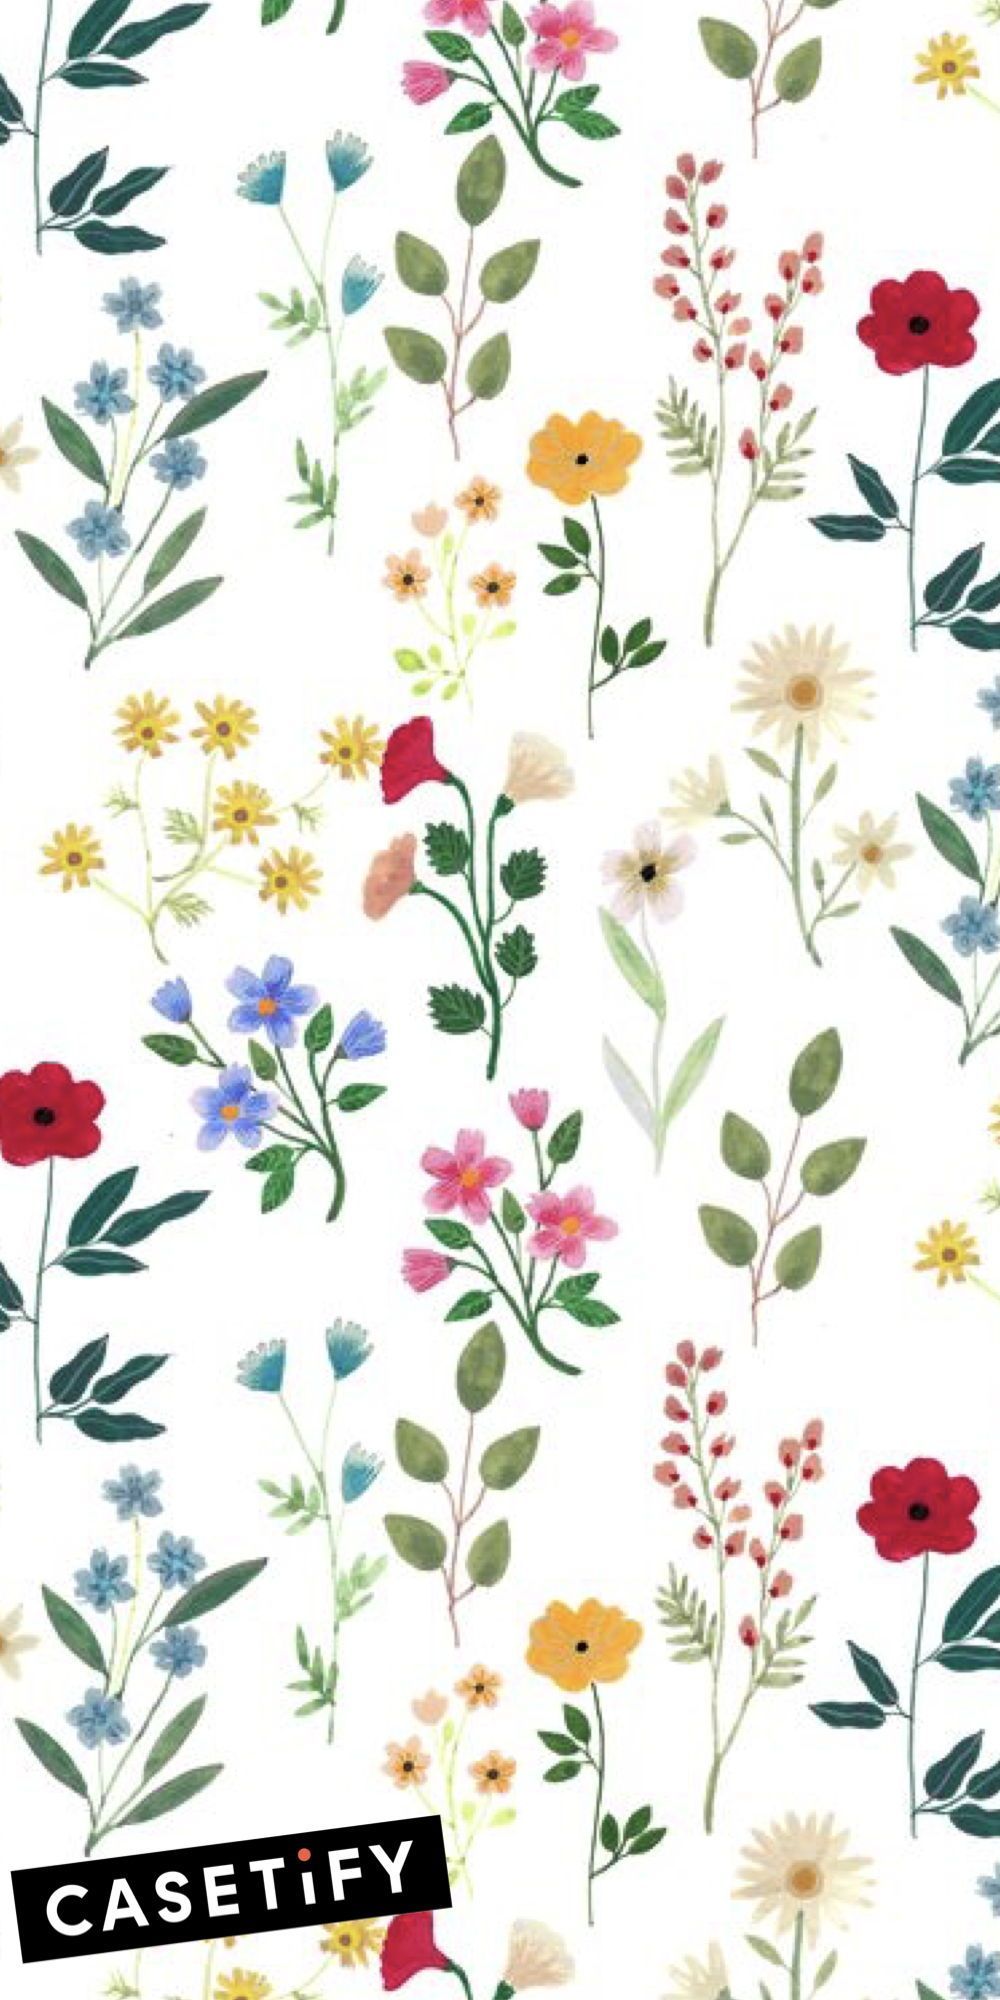 animated flower wallpapers for mobile phones